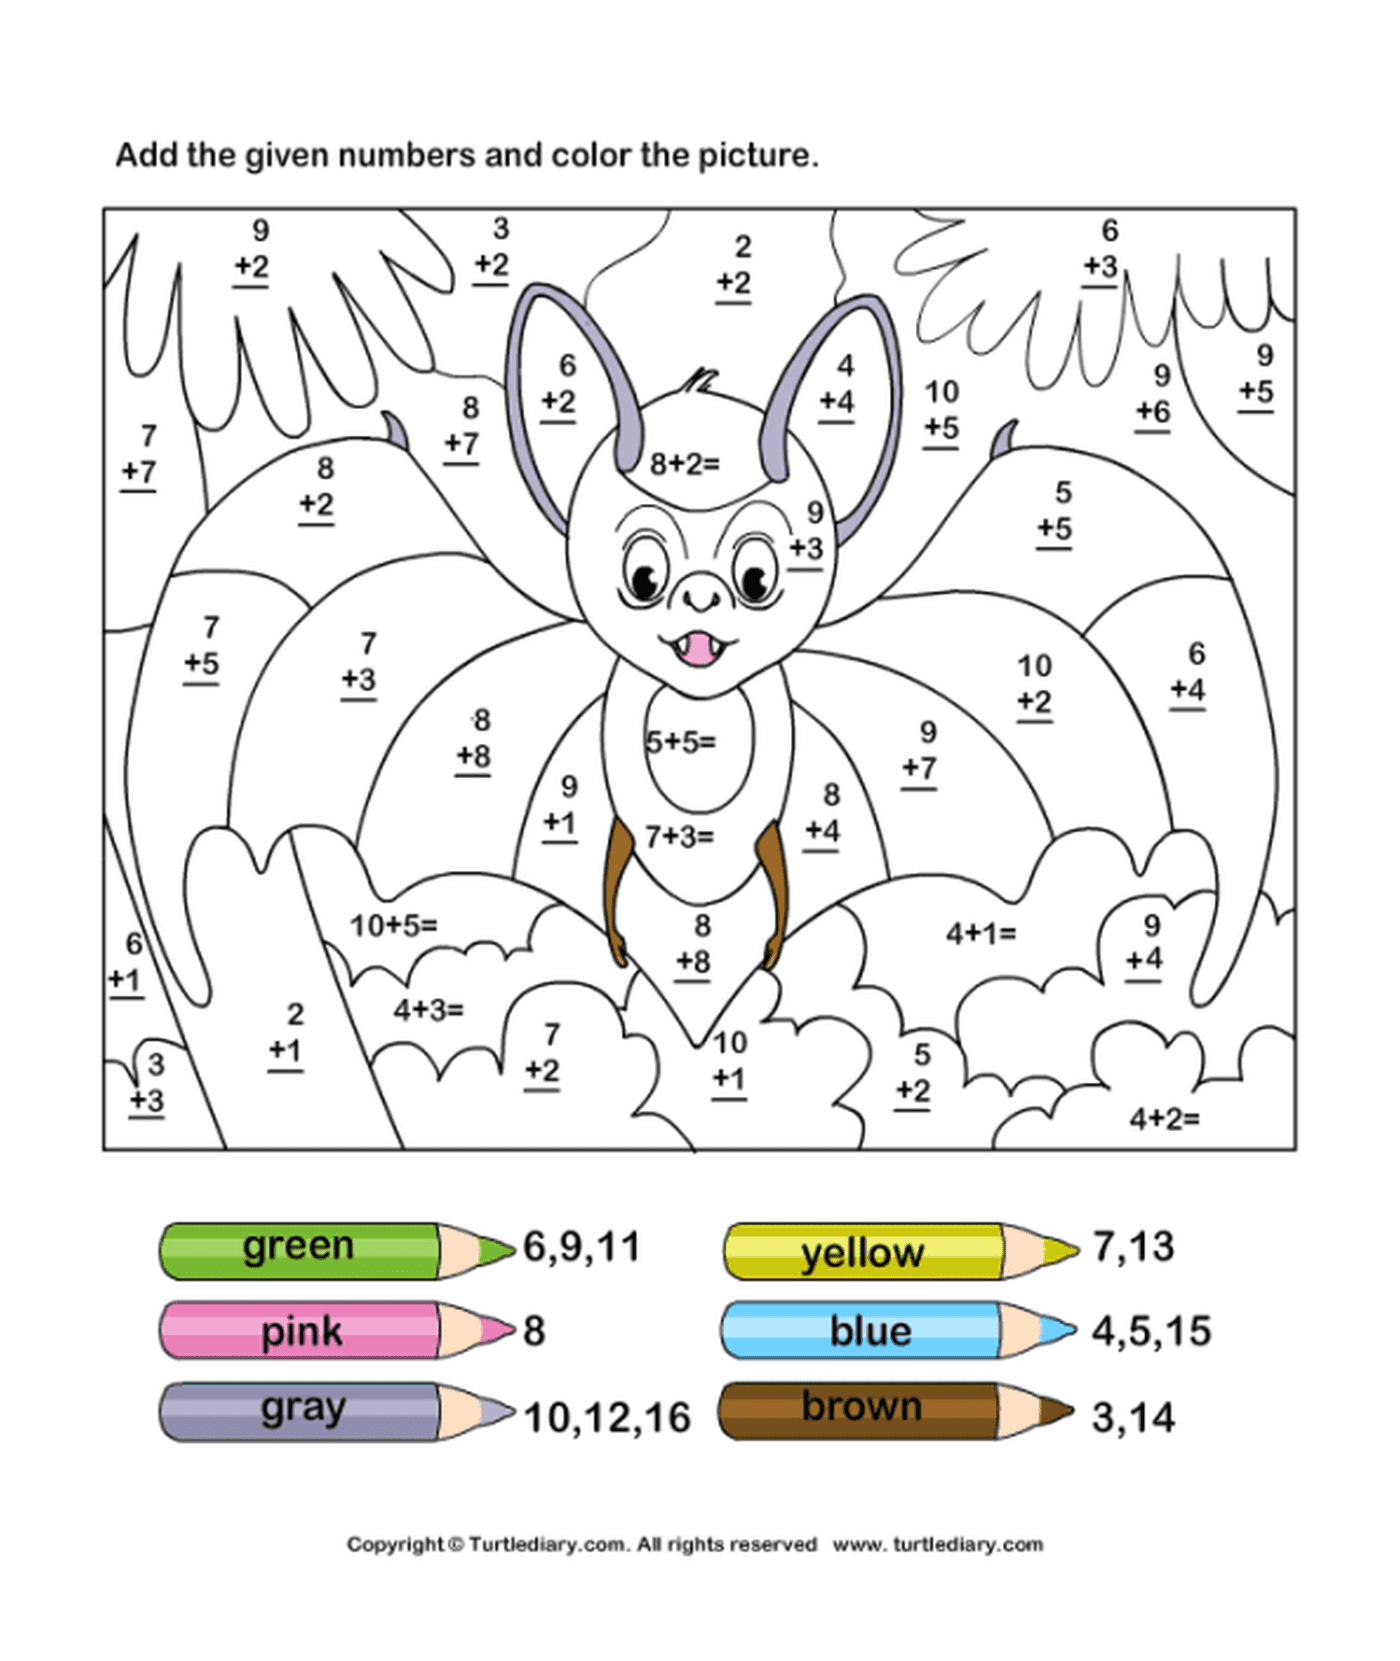  A bat with coloring by number from 11 to 19 